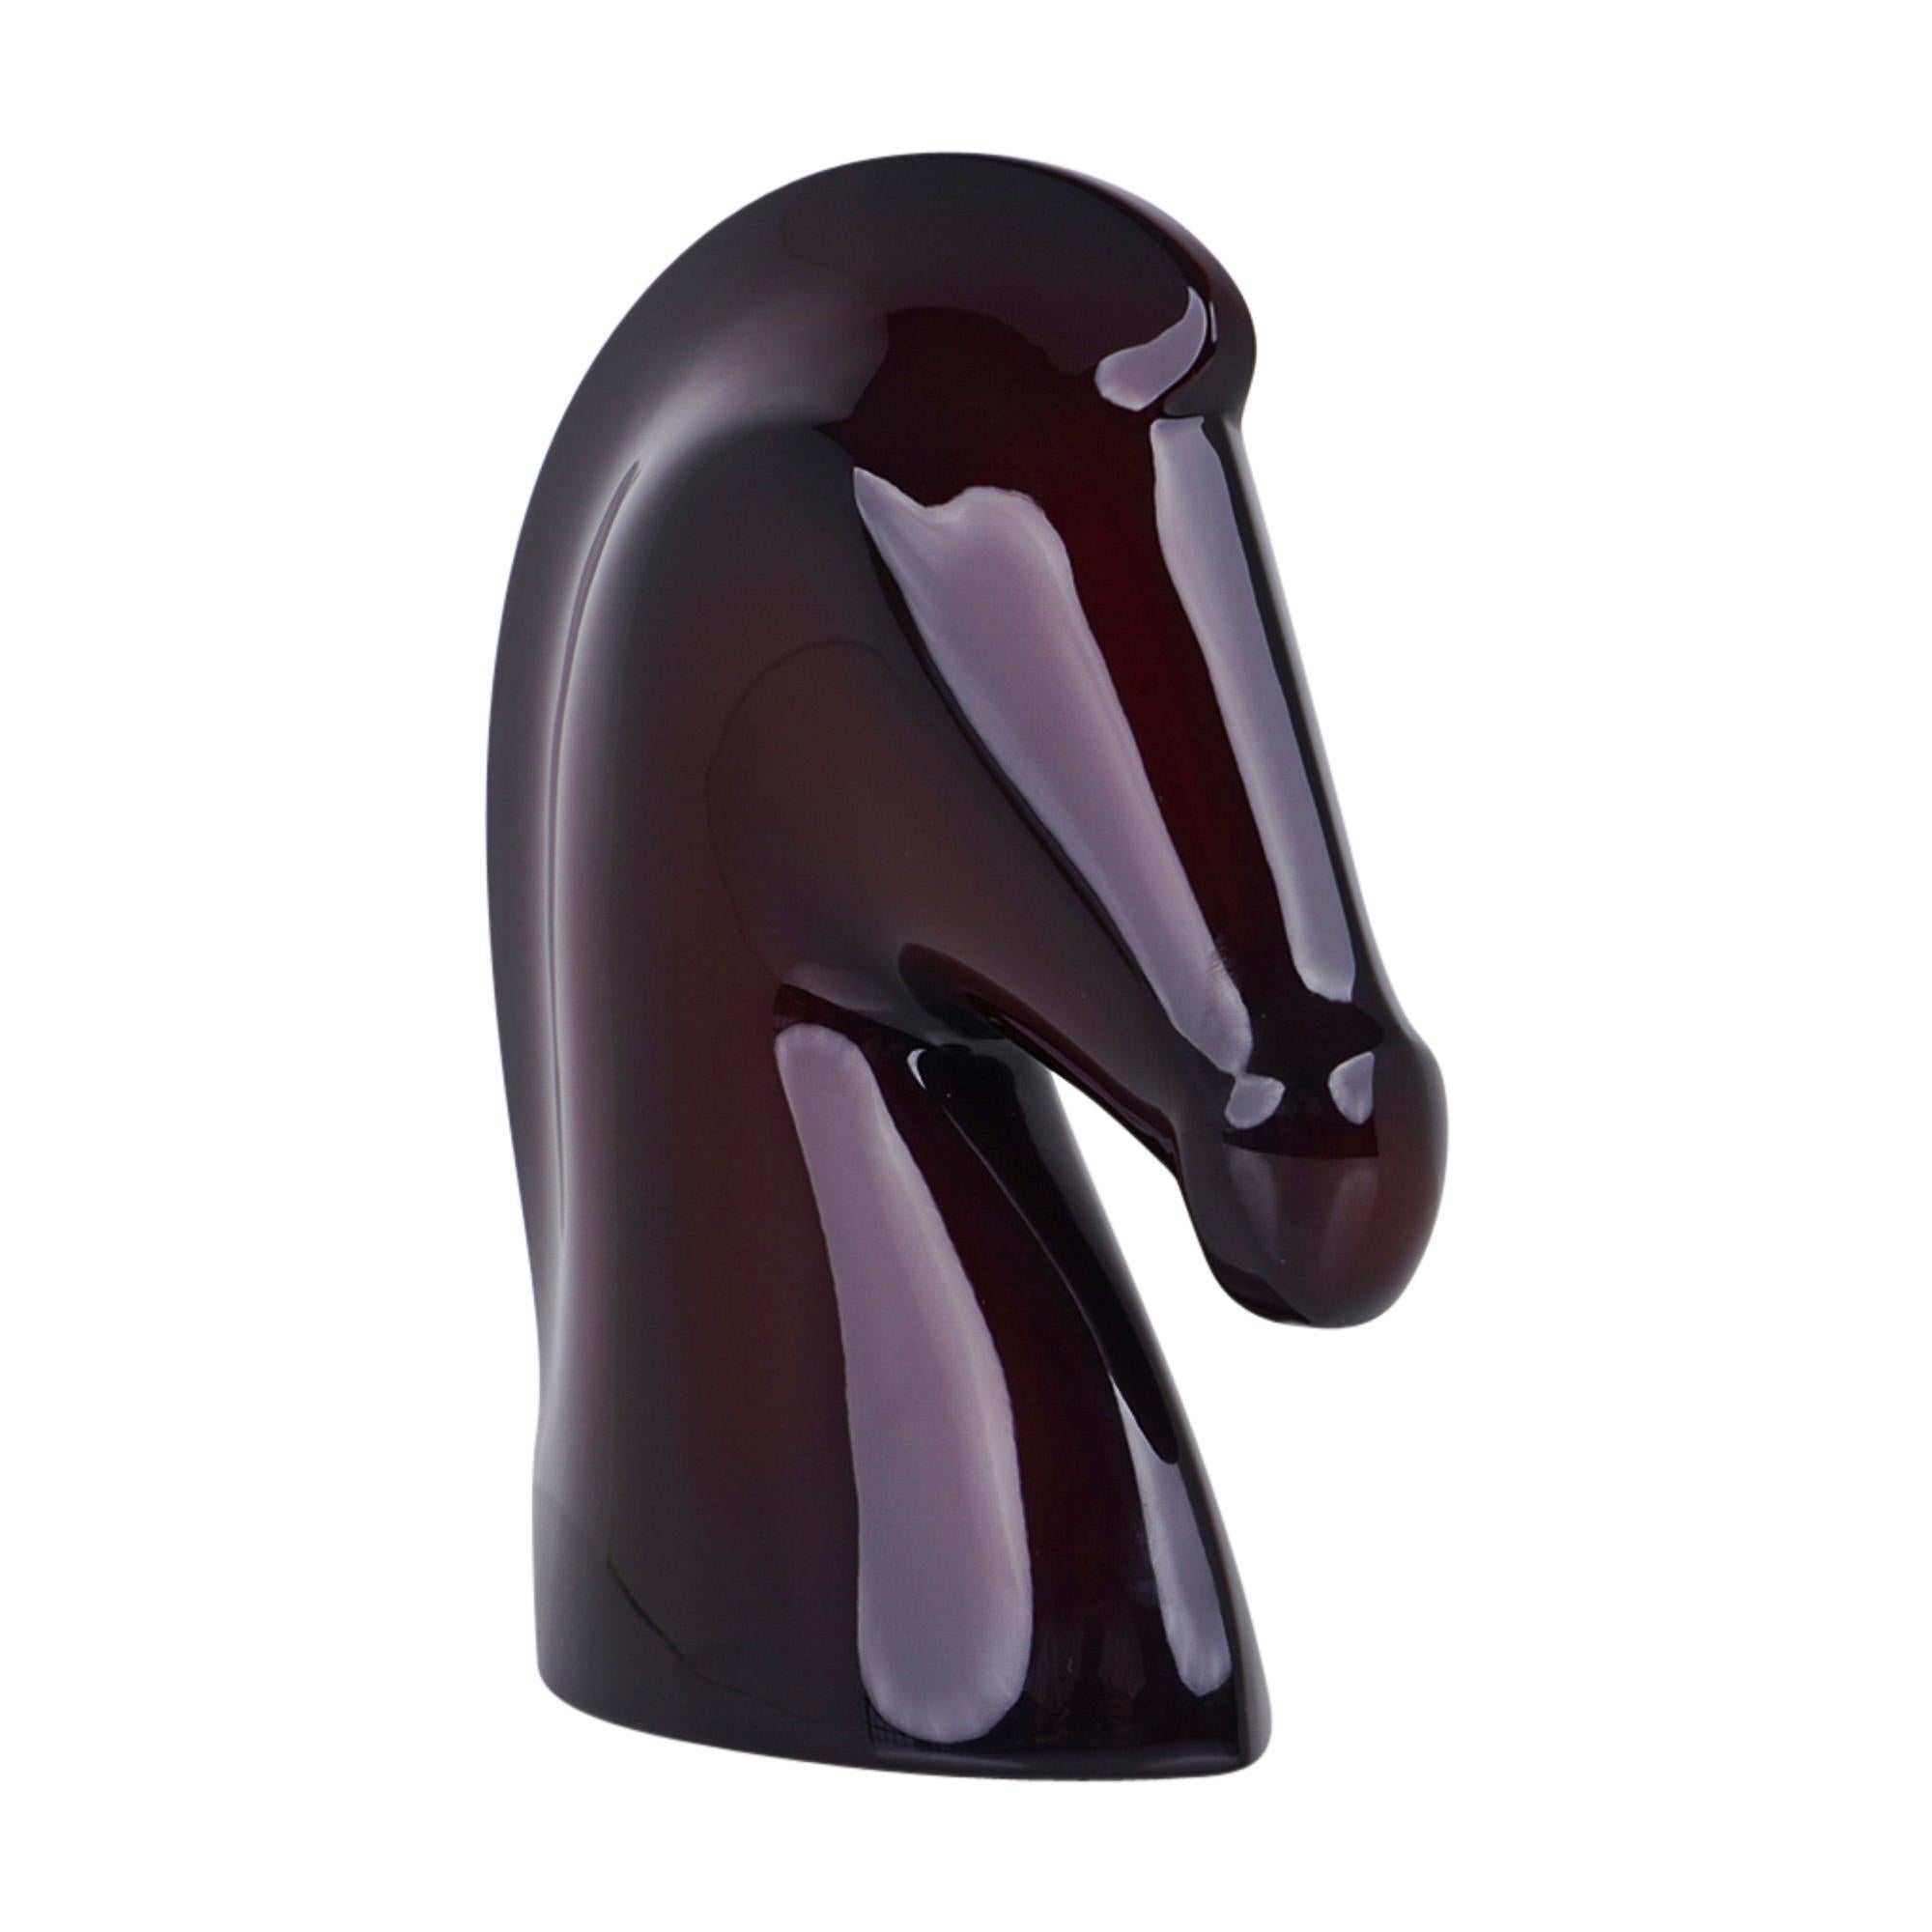 Mightychic offers an Hermes Samarcande paperweight featured in Aubergine lacquered wood.
Crafted in layers of hand lacquered wood, and sanded to reveal the beauty of the colour.
This exquisite paperweight can serve as a stand alone.
Leather base